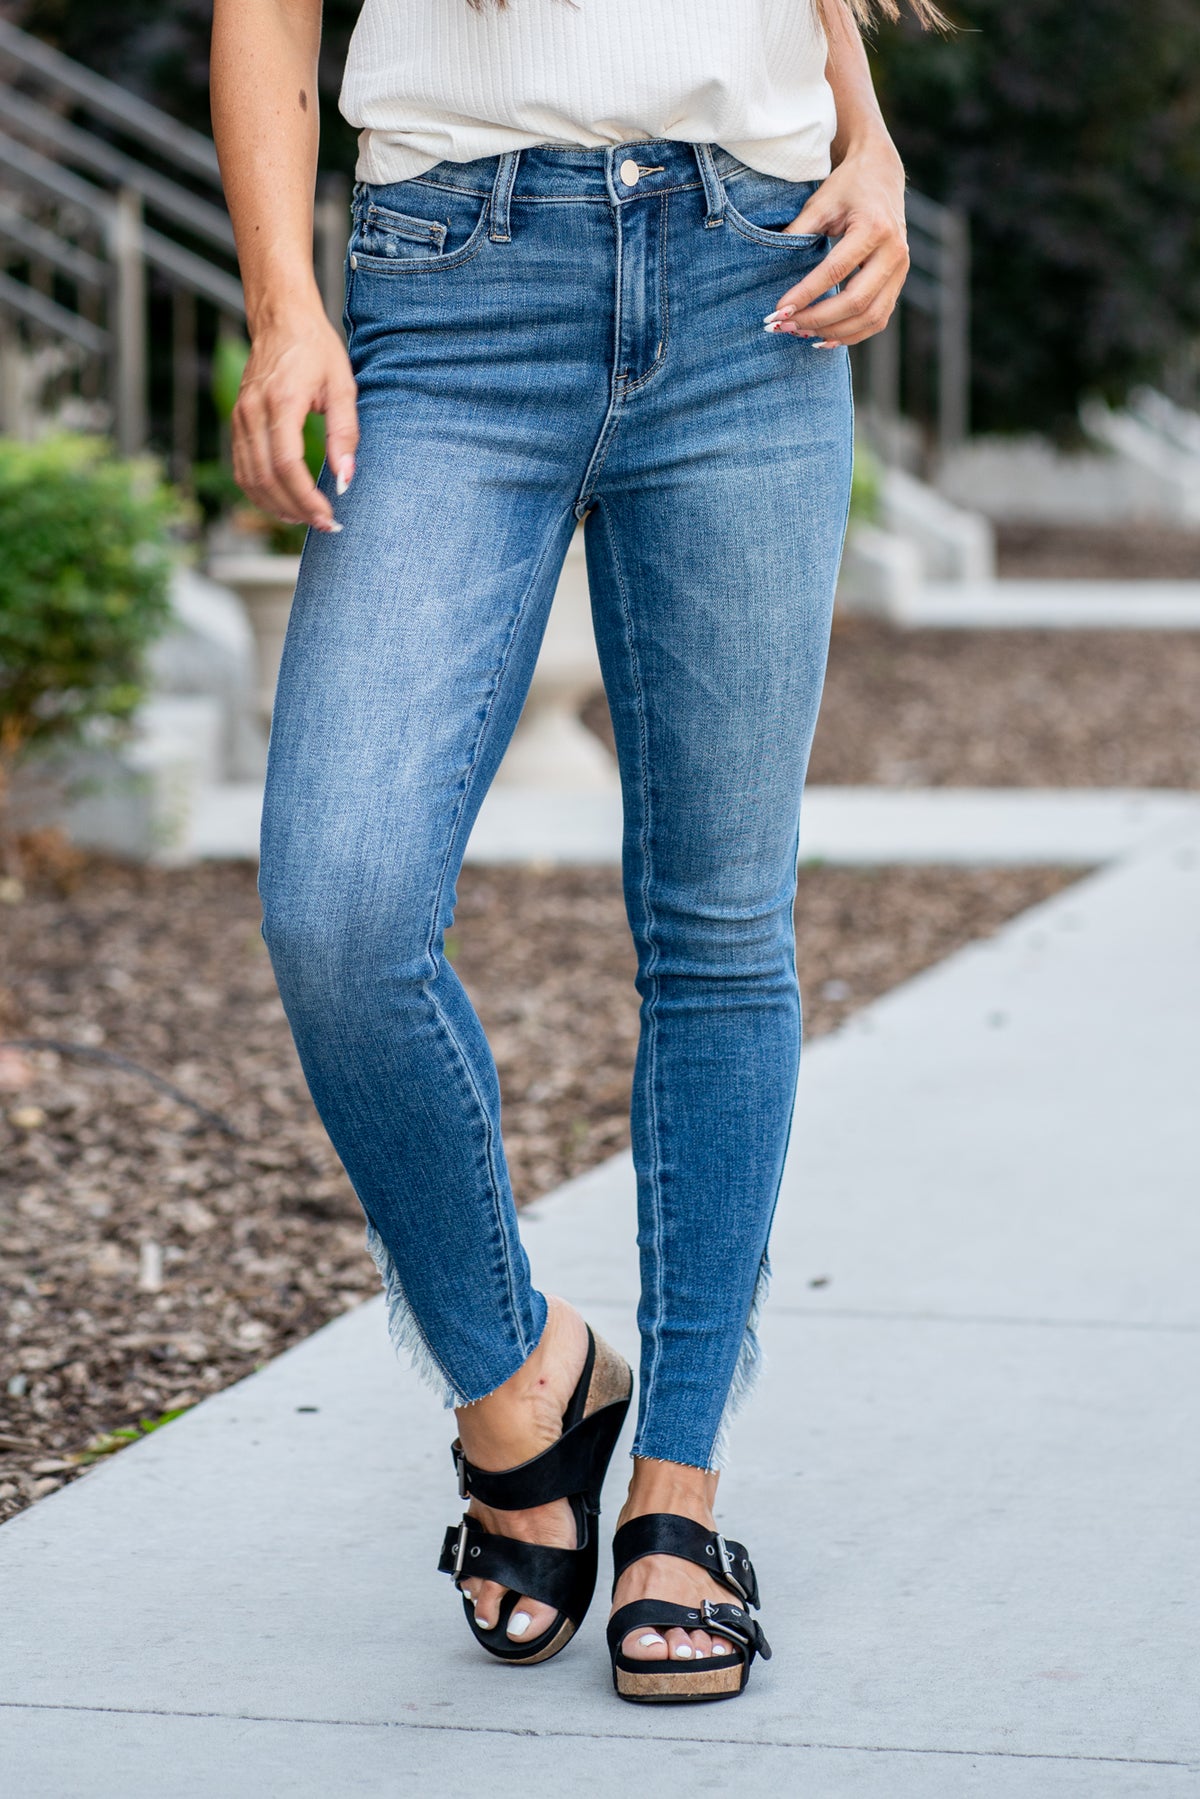 Judy Blue  Don't be afraid to wear high-waisted jeans with a medium blue wash and split hem detail, these will be your everyday go-to denim.   Color: Medium Wash Cut: Skinny, 28.5" Inseam*  Rise: High Rise 10.5" Front Rise* Material: 93% Cotton, 6% Polyester, 1% Spandex Machine Wash Separately In Cold Water Stitching: Classic Fly: Zipper Style #: JB88459 | 88459 *Measured on the smallest size, measurements may vary by size.  Contact us for any additional measurements or sizing.